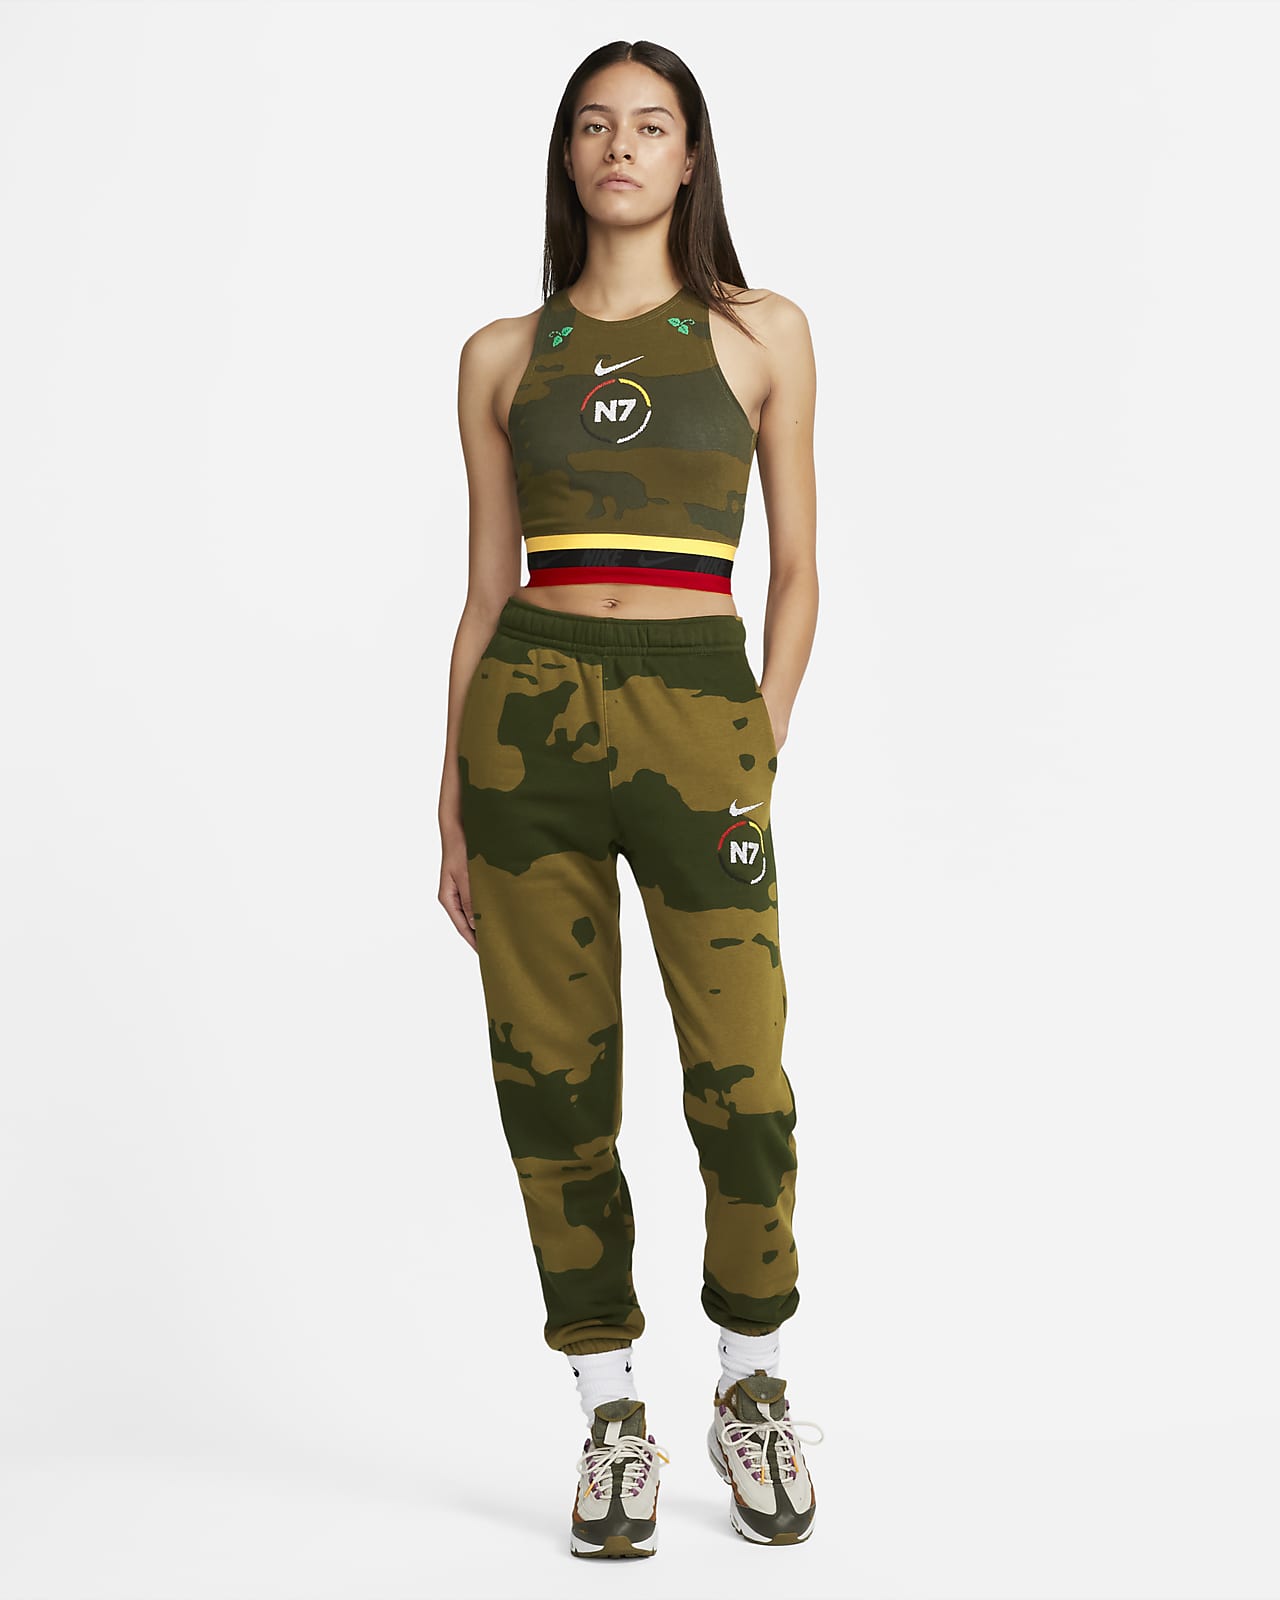 NIKE $tools.getValue($product, 'name'): TOPS Donna